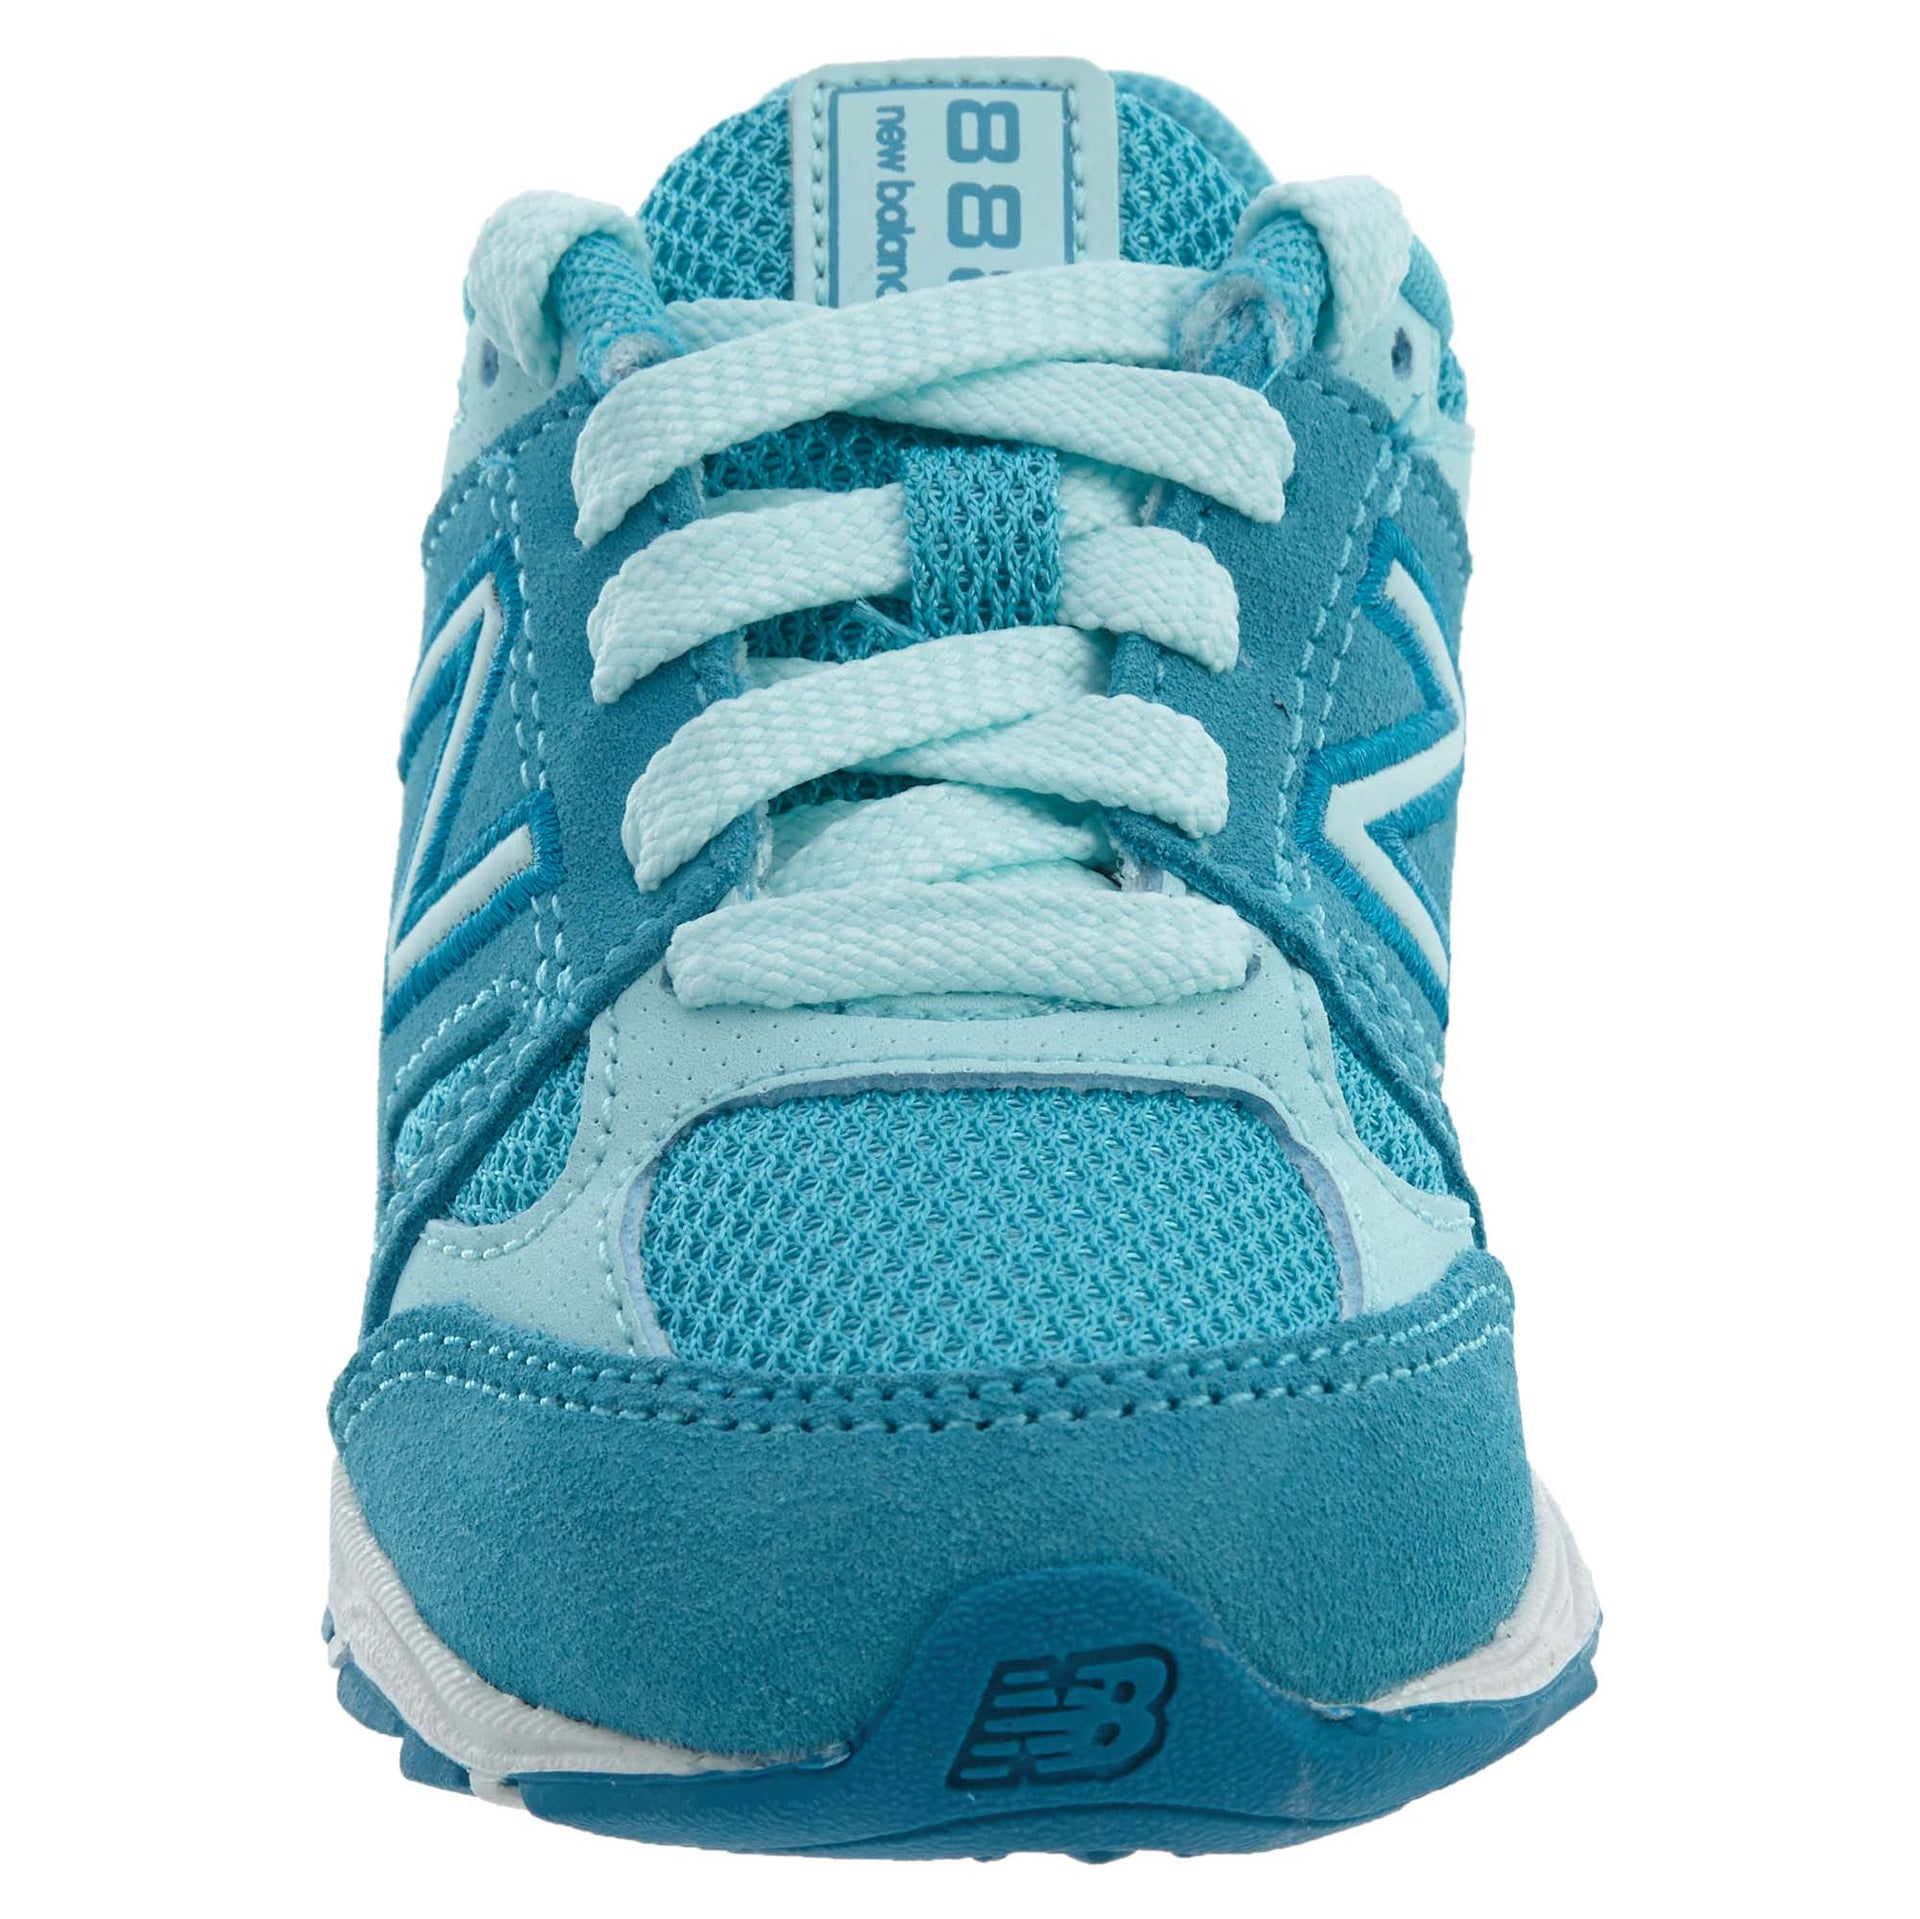 New Balance Running Course Toddlers Style : Kj888